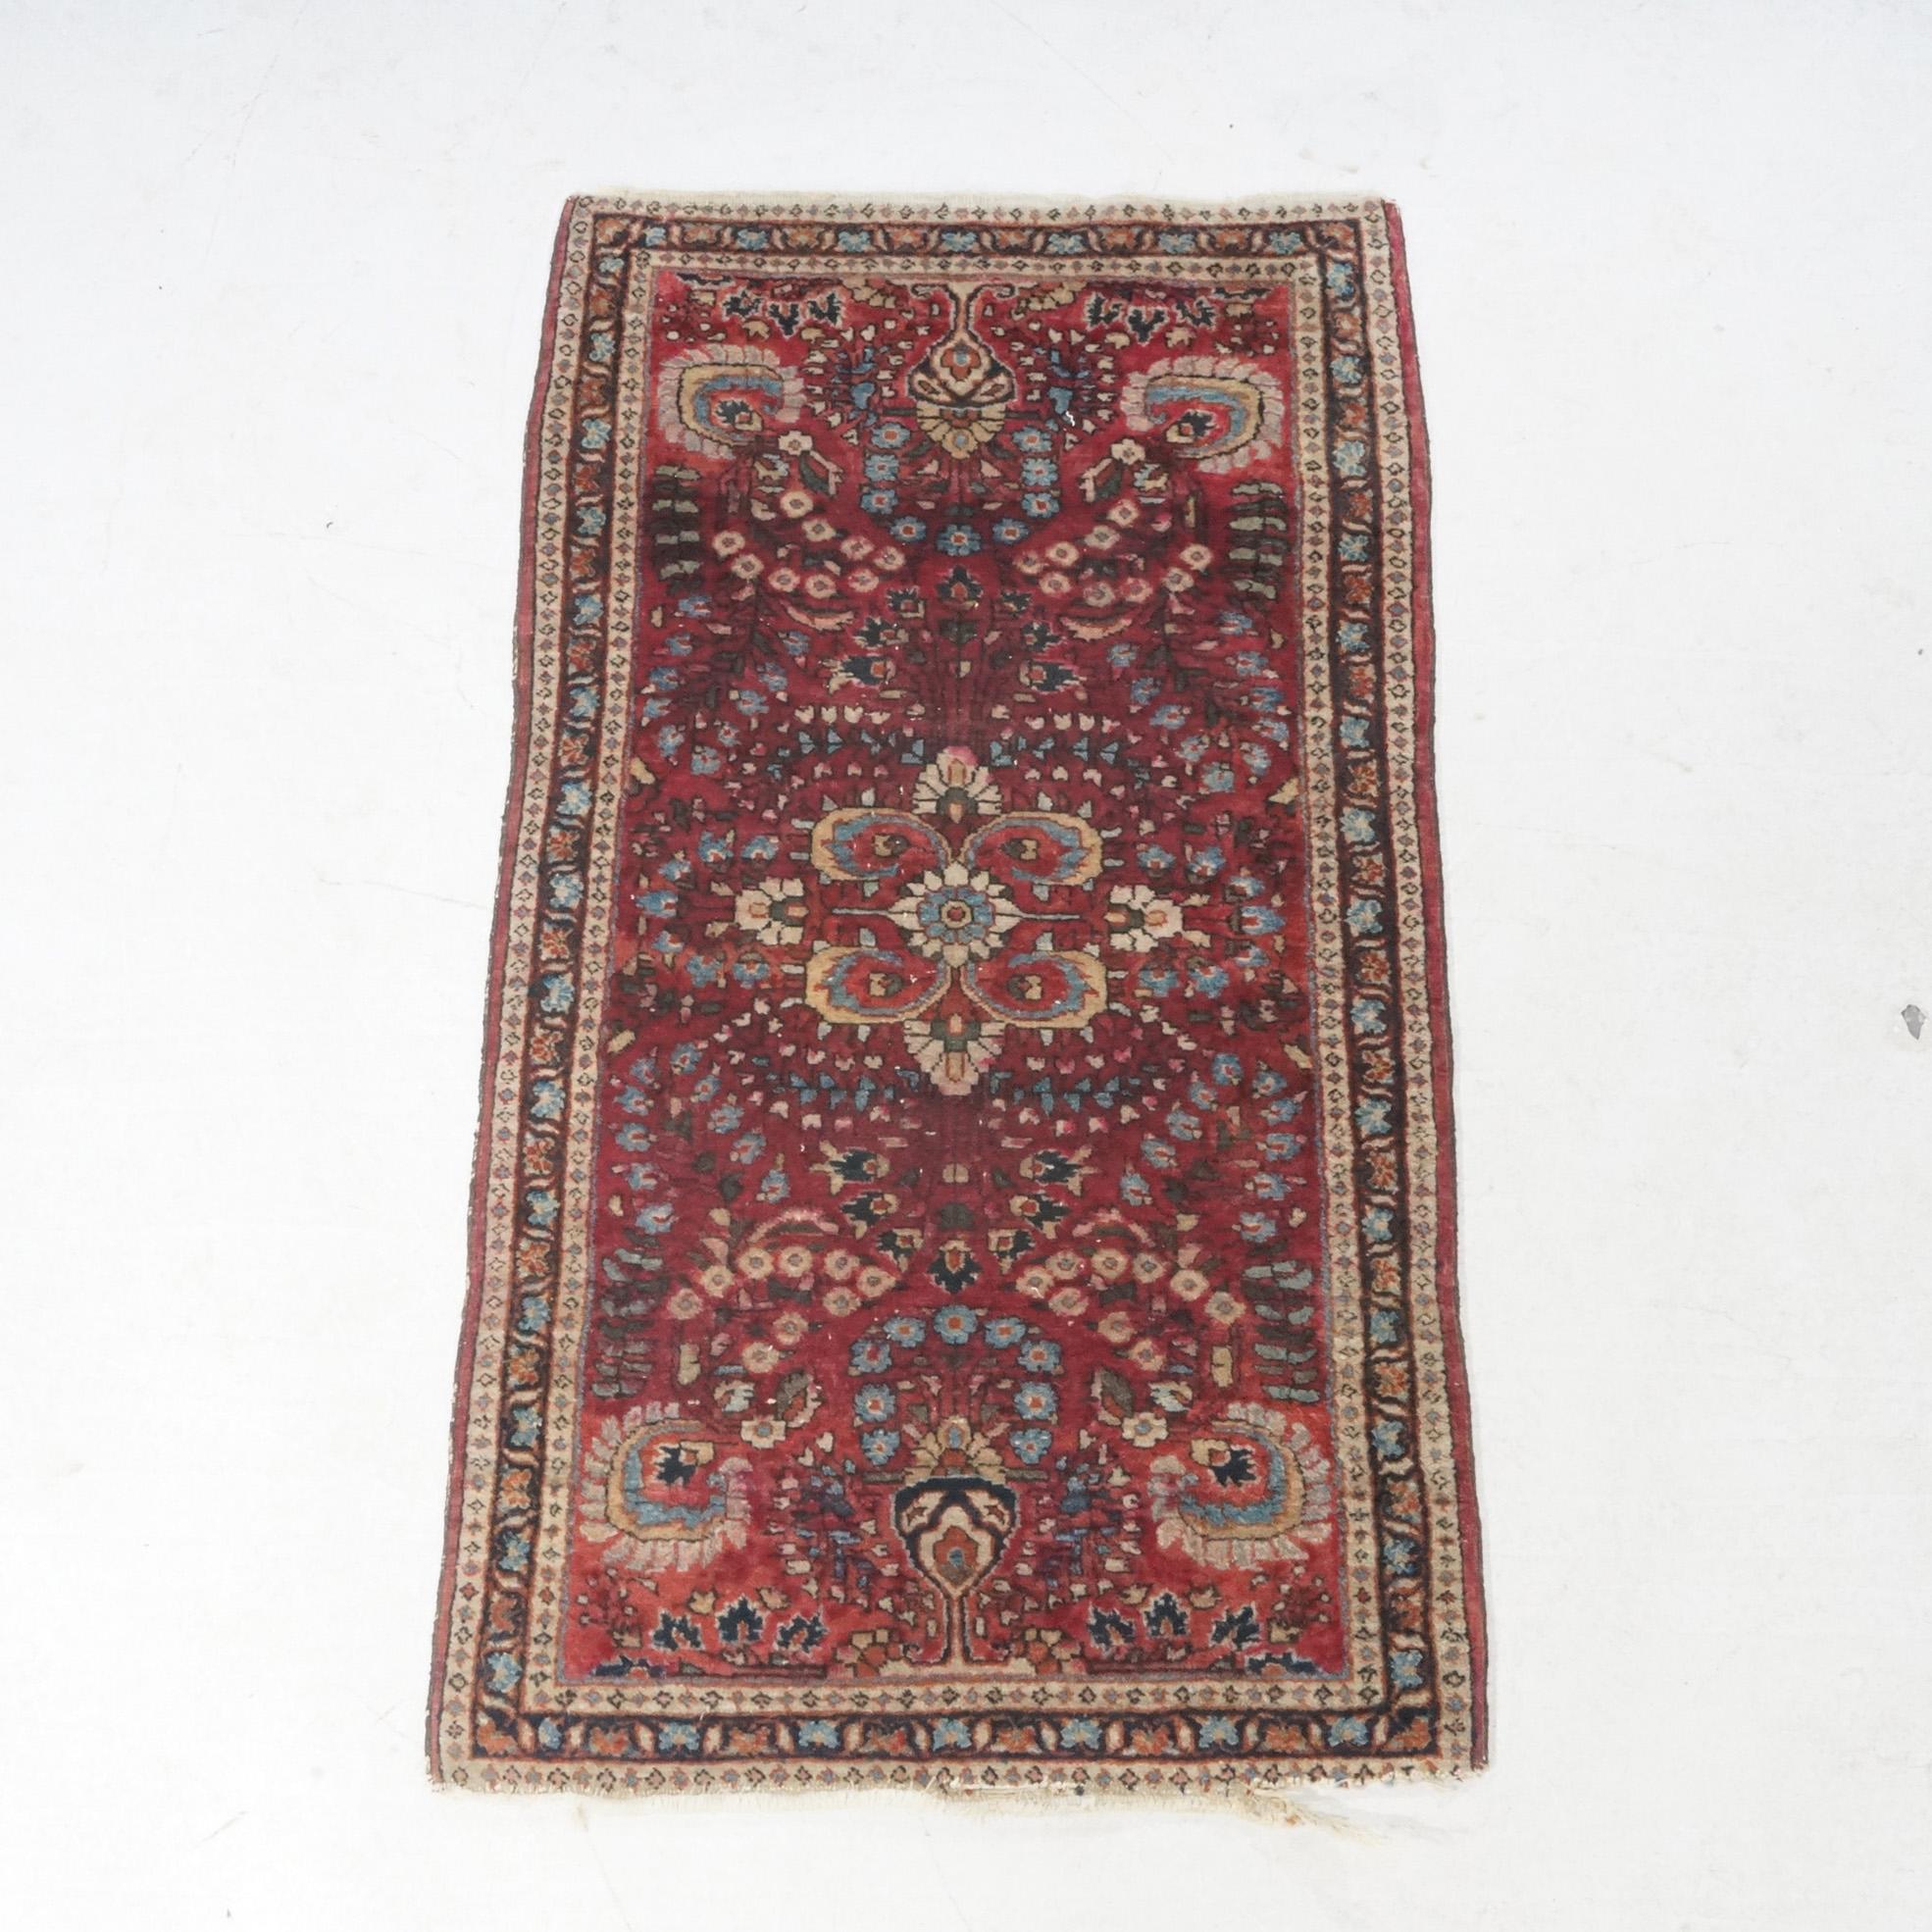 An antique Sarouk oriental rug offers wool construction with central medallion and foliate design on red ground, circa 1930.

Measures - 24.5